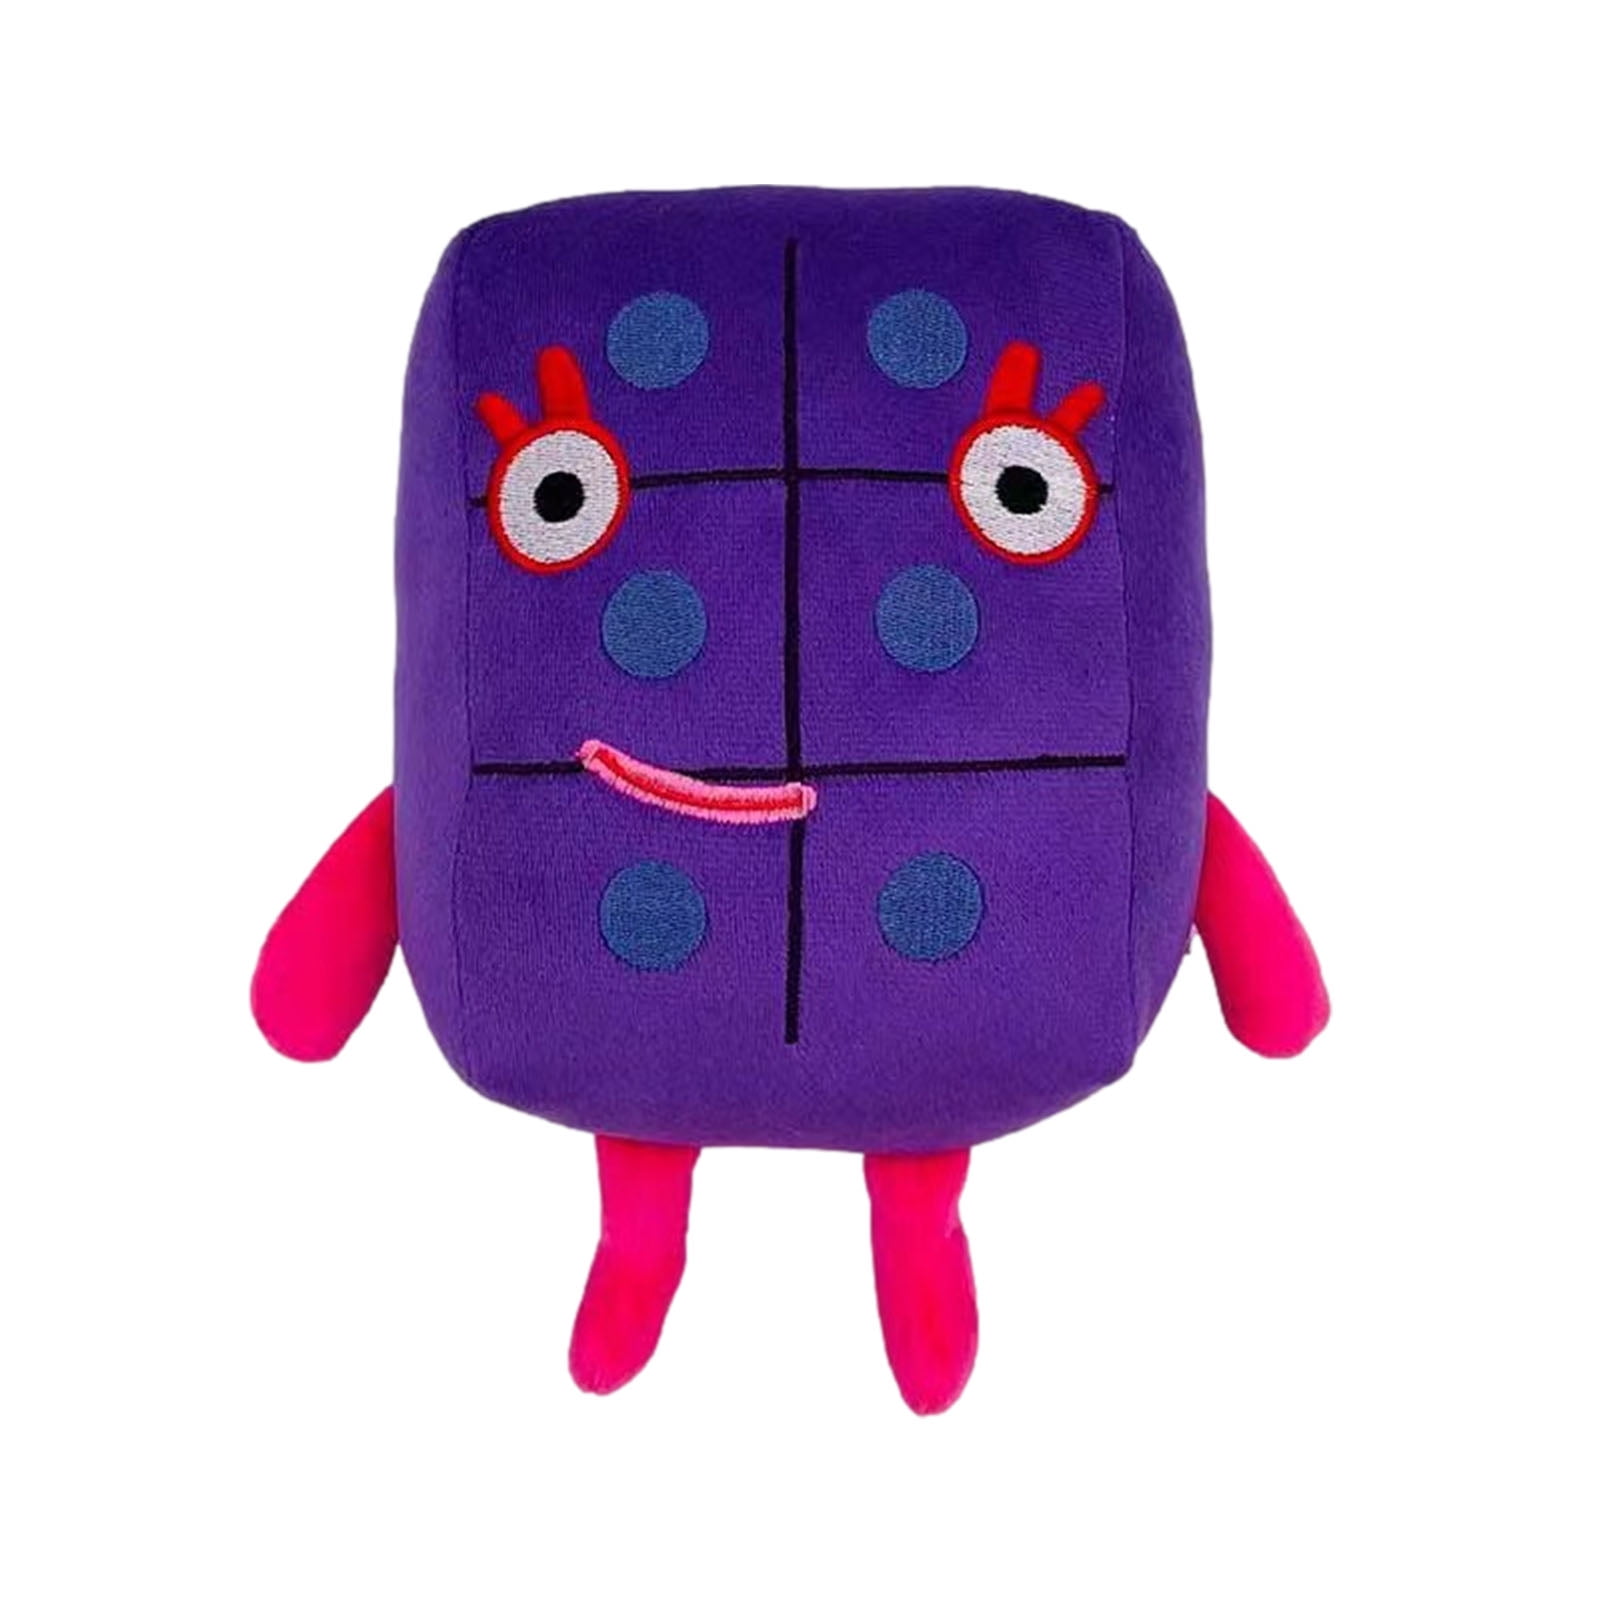 Numberblocks Plush Toys，Cartoon Numberblocks Toys Stuffed Toy ，1-4 Colourful Mathematics Enlightenment Animation Plush Doll for Boys and Girls